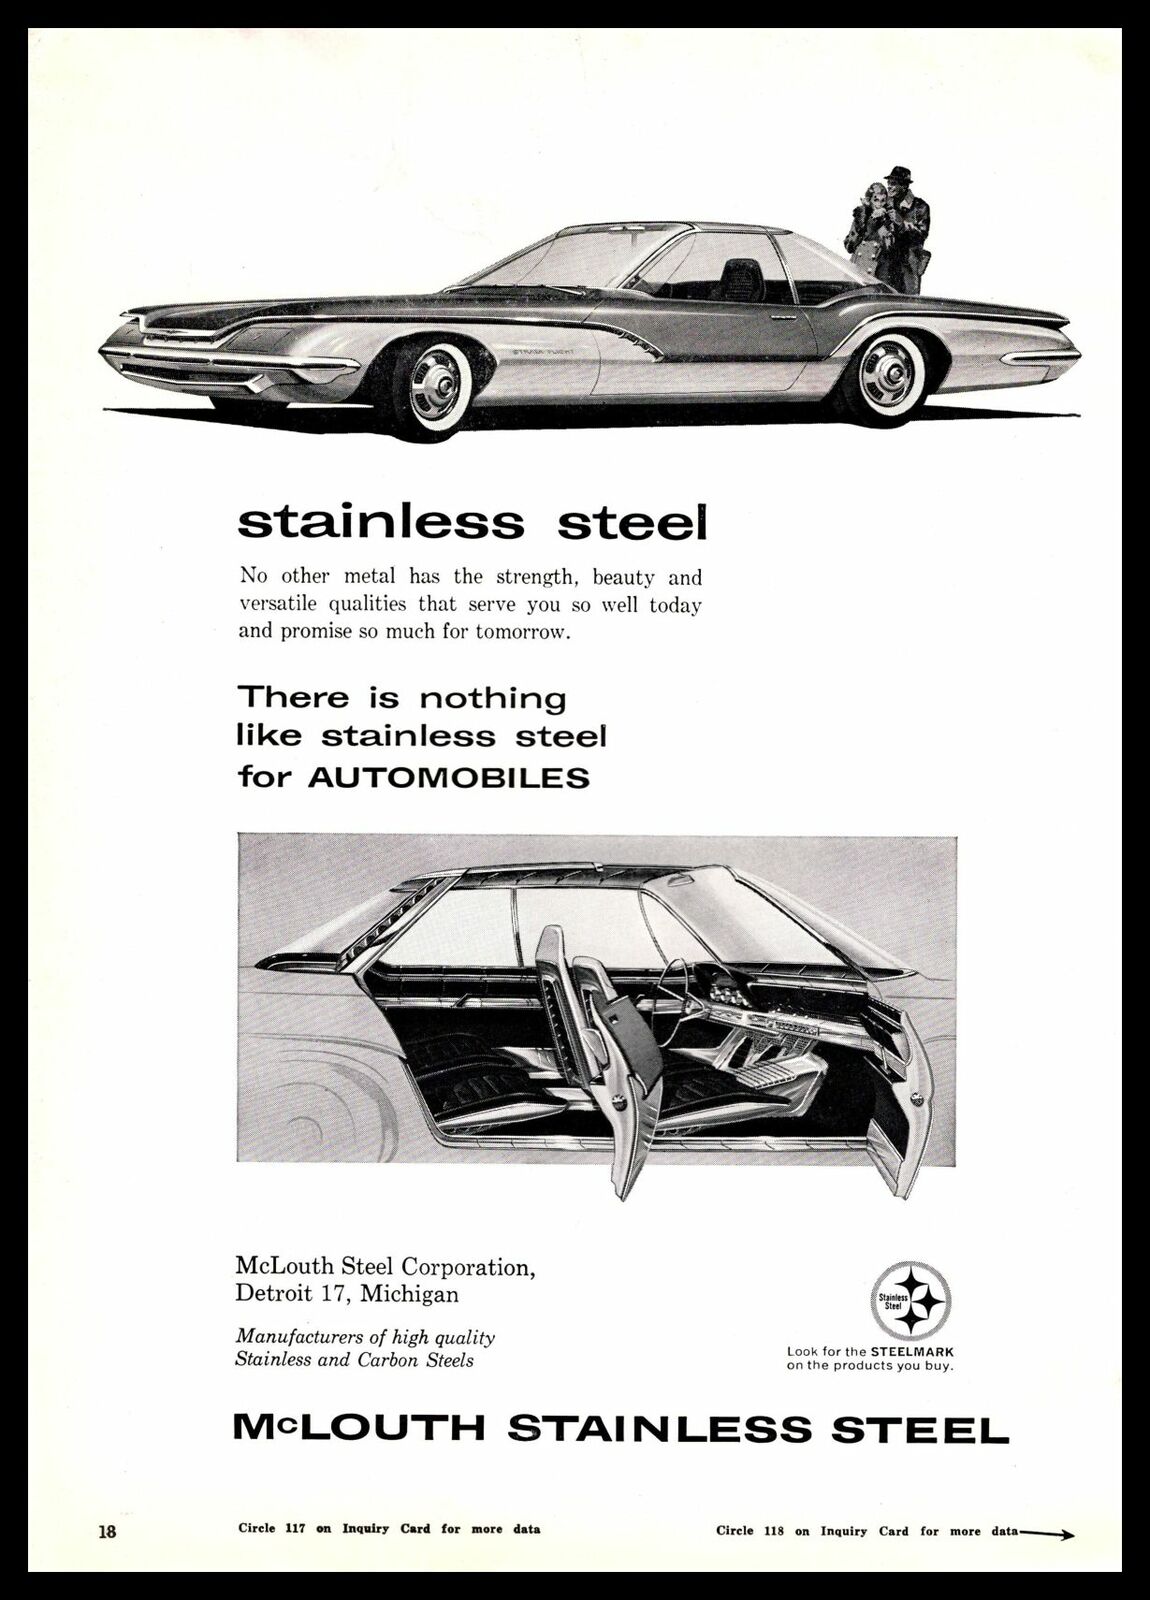 1961 McLouth Stainless Steel Space Age Futuristic Concept Car Vintage Print Ad